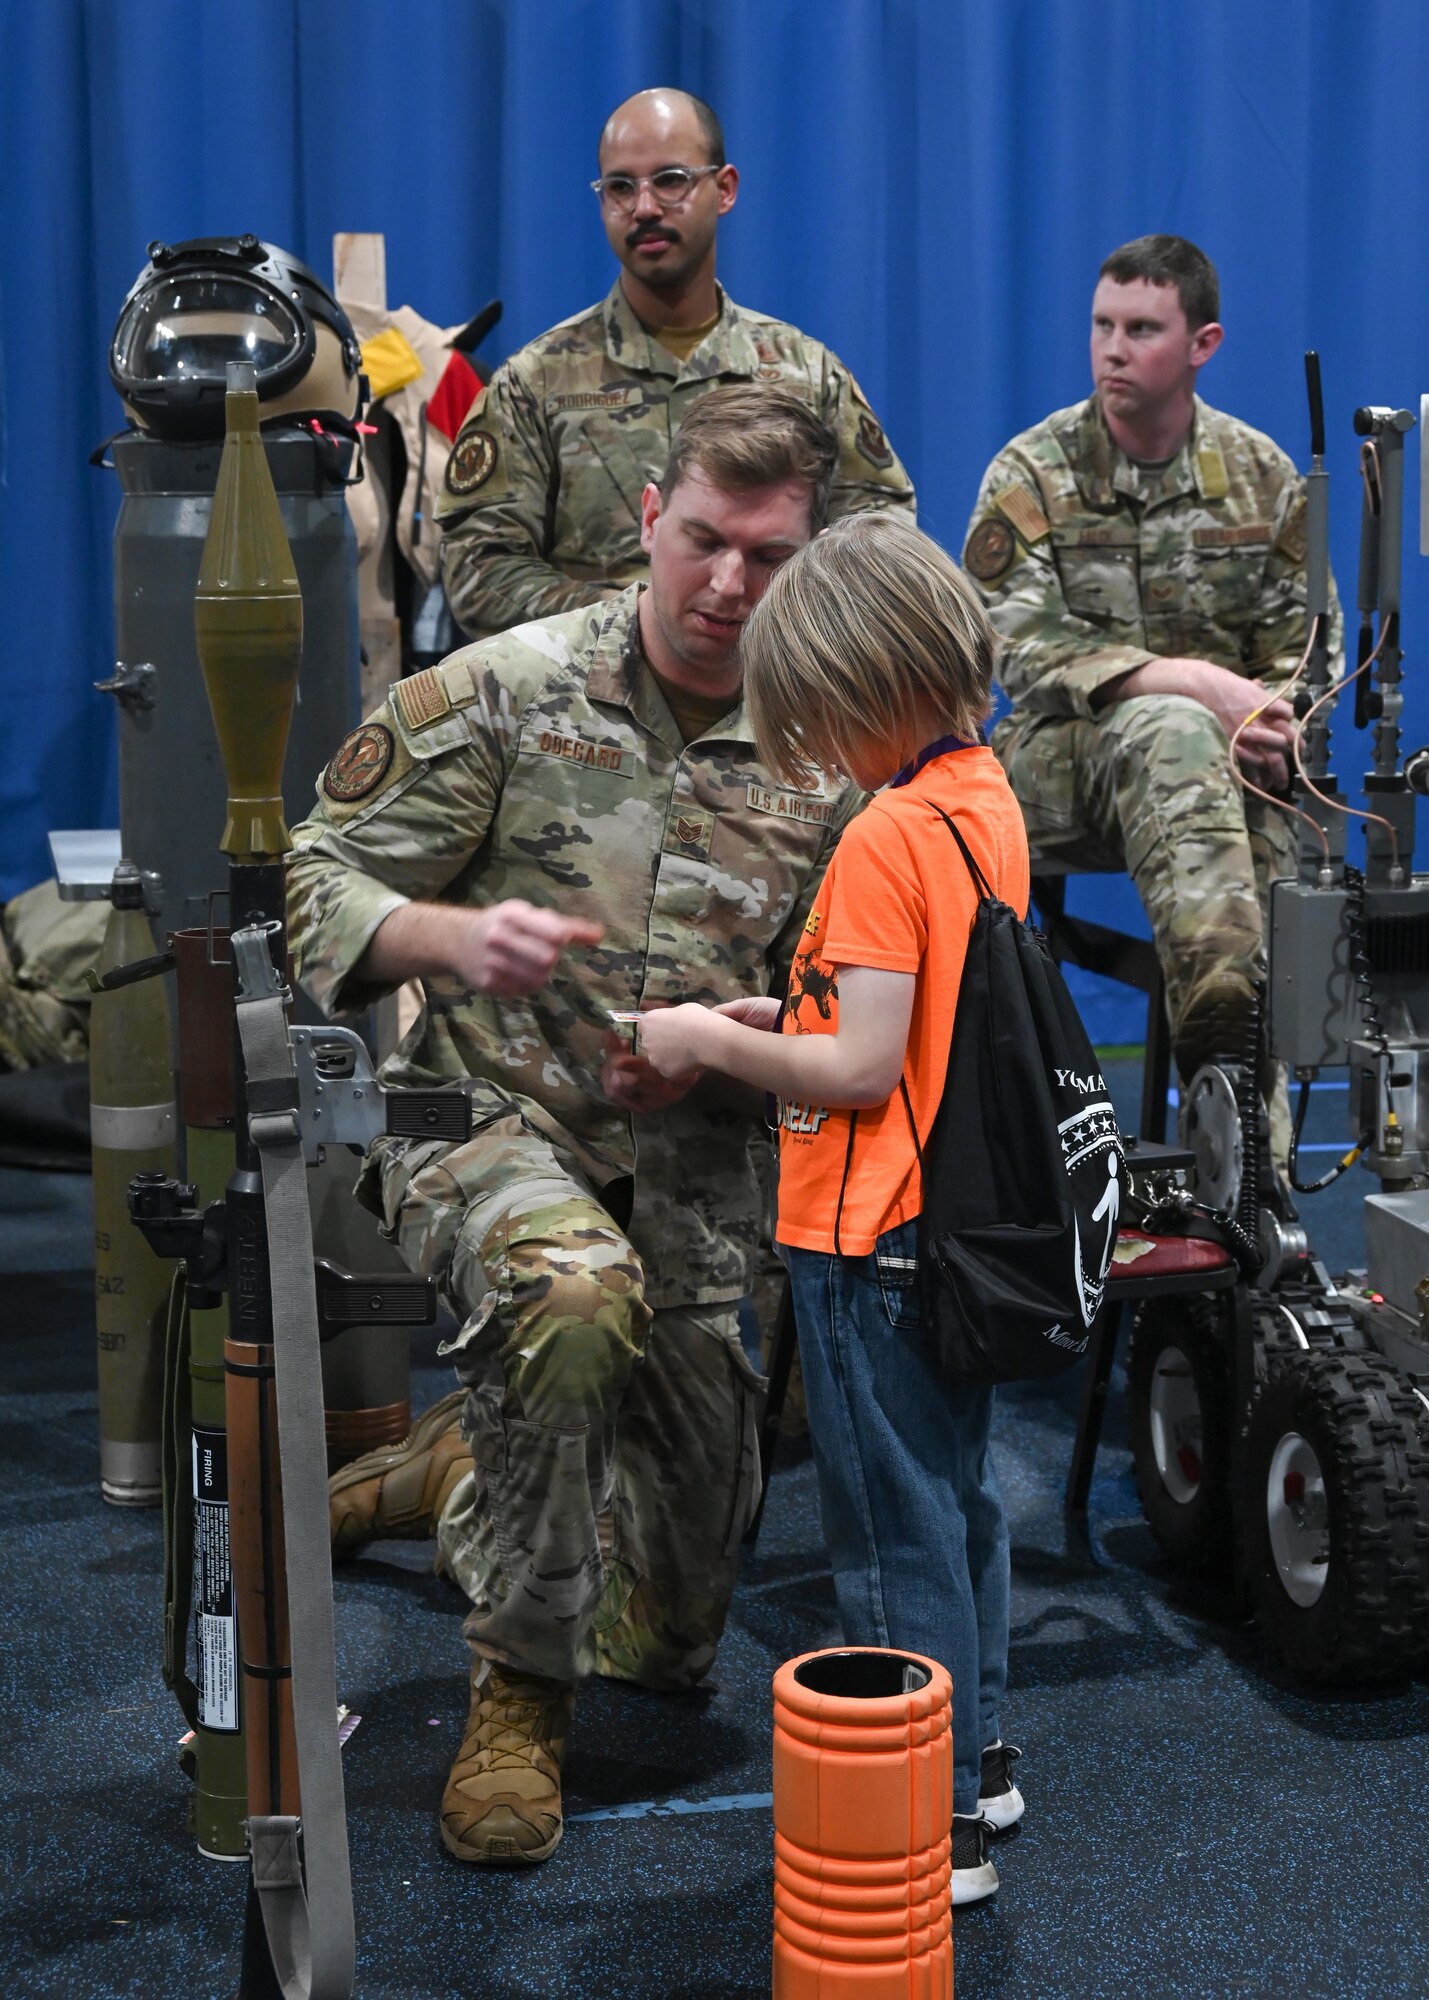 U.S. Air Force Staff Sgt. Spencer Odegard from the 5th Explosive Ordnance Disposal Squadron shows children how to operate a bomb defusing robot as part of Operation Hero in the Community Complex Center at Minot Air Force Base, North Dakota, Jan. 20, 2023. Volunteer Airmen from 20 different agencies within the 5th Bomb Wing and 91st Missile Wing showcased their duties, conducted demonstrations, and provided interactive experiences to over 150 families. (U.S. Air Force photo by Senior Airman Caleb S. Kimmell)